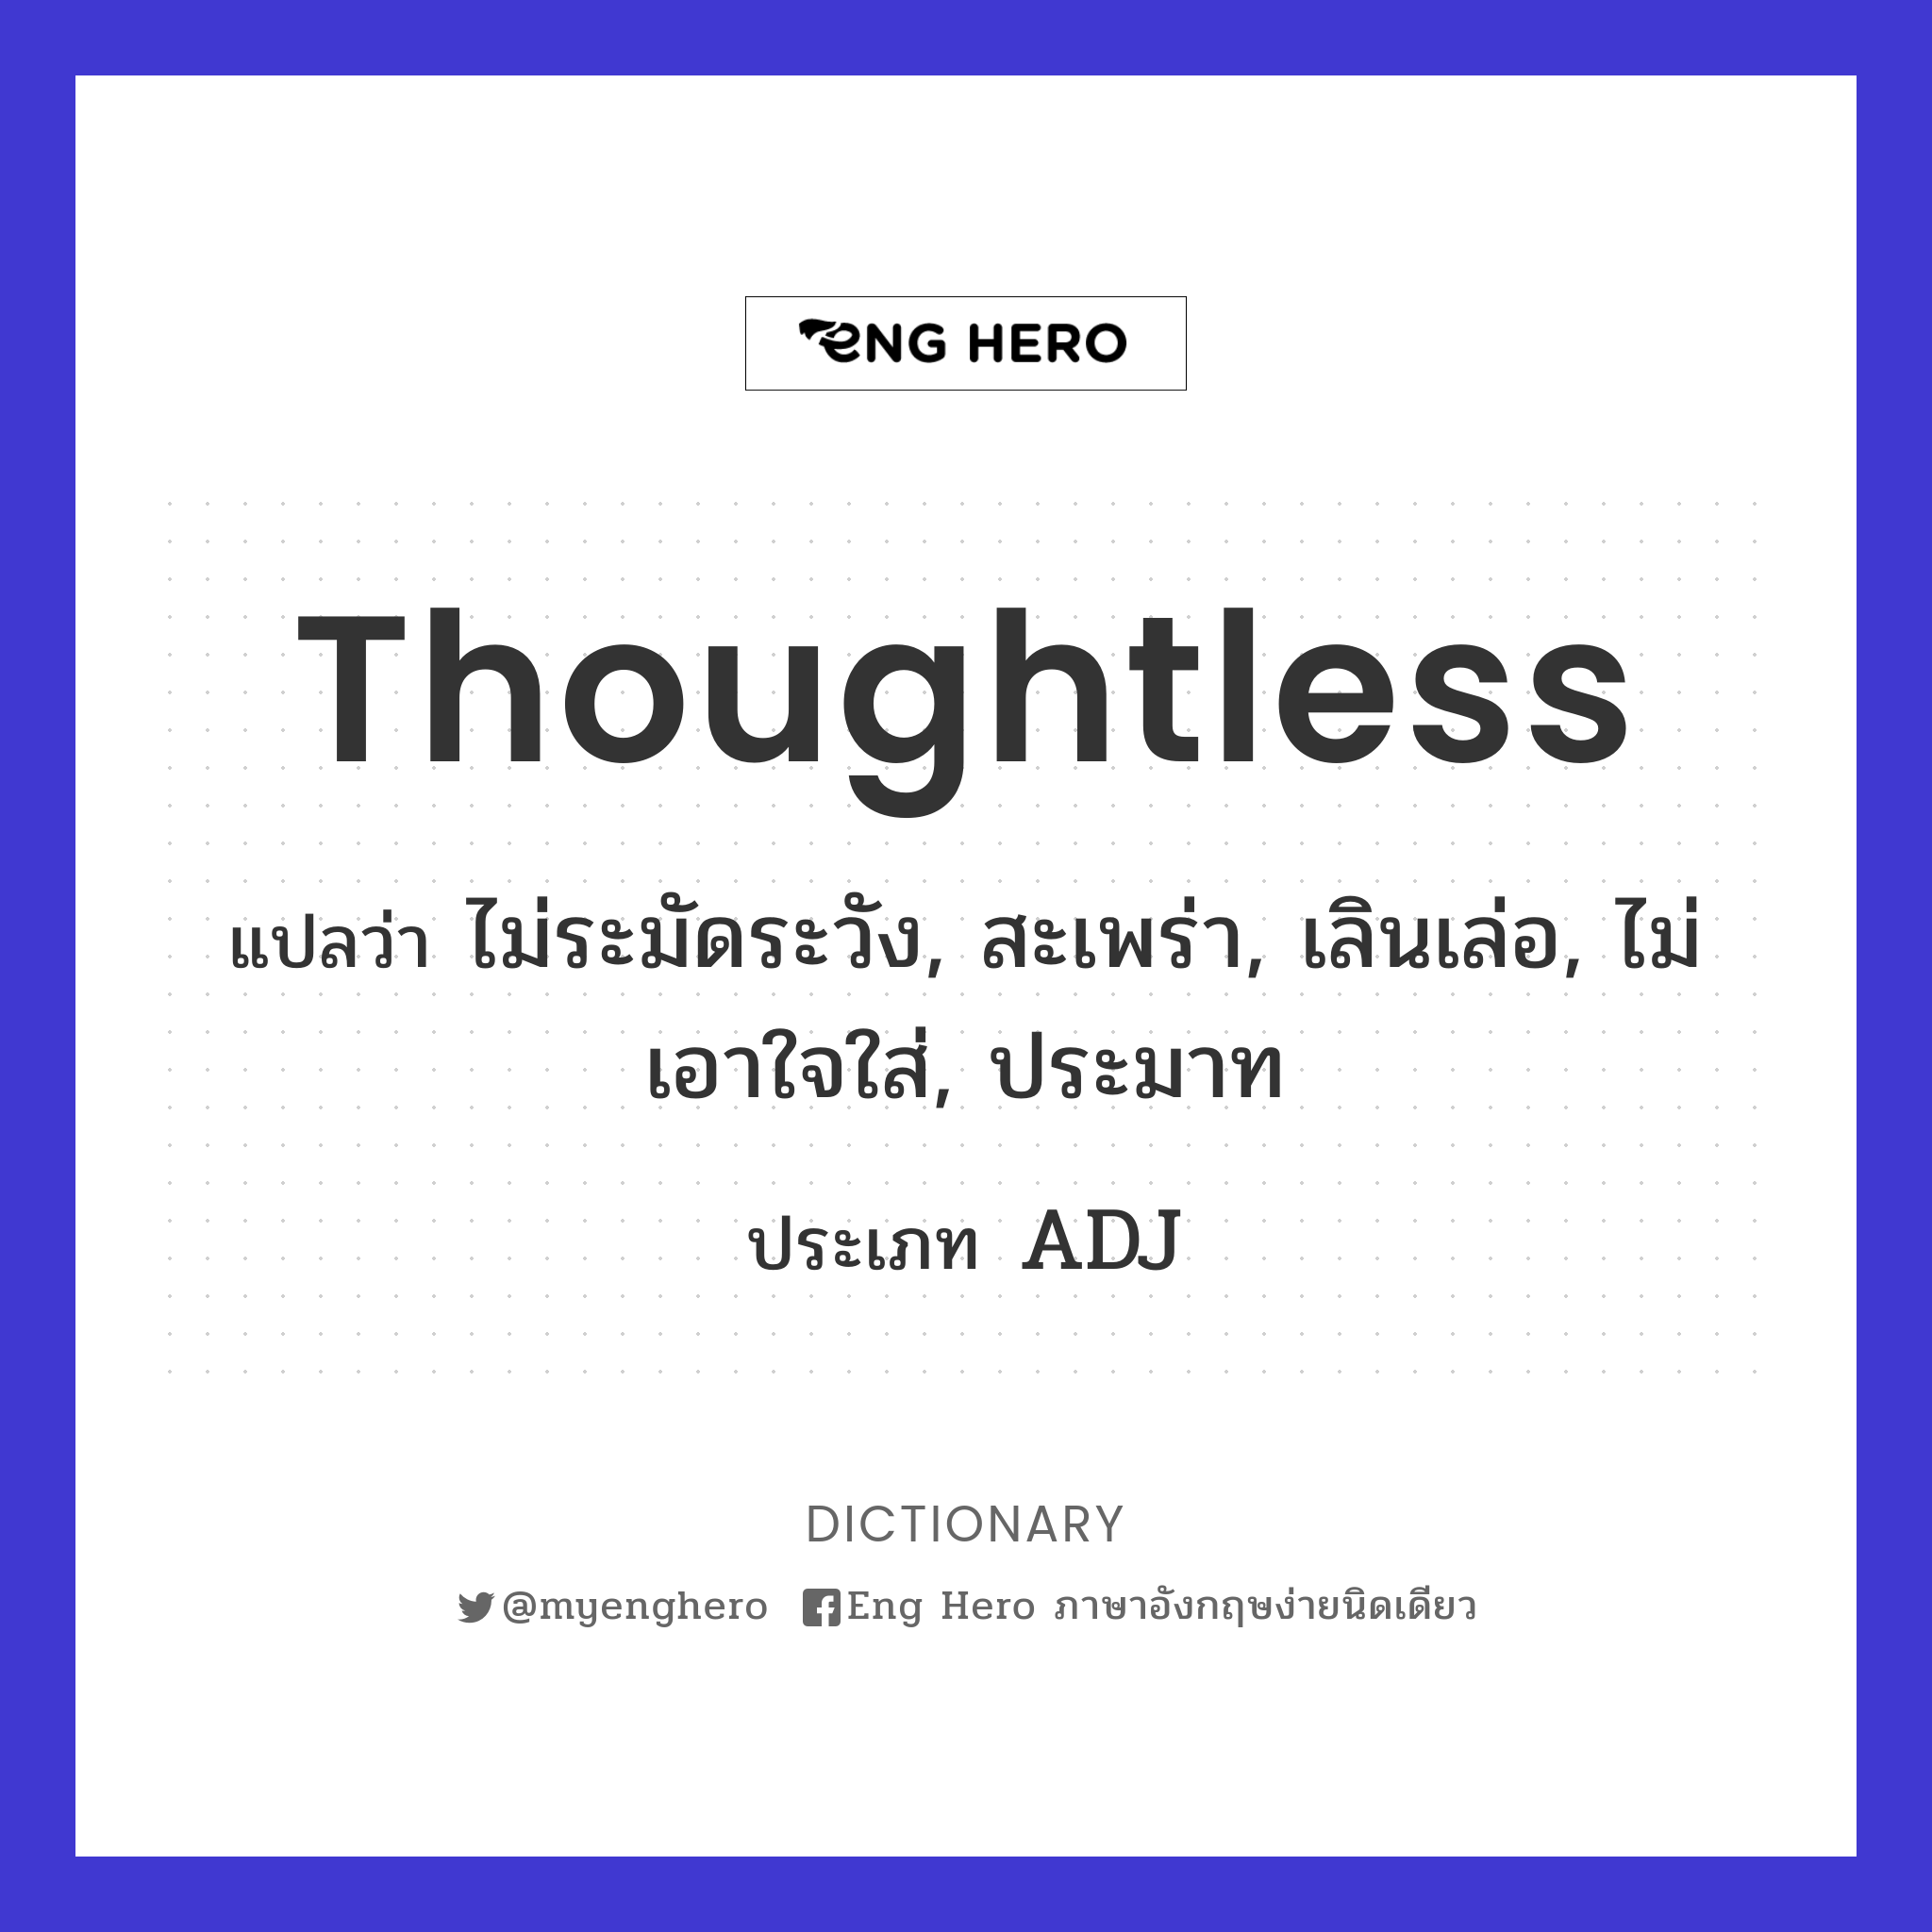 thoughtless